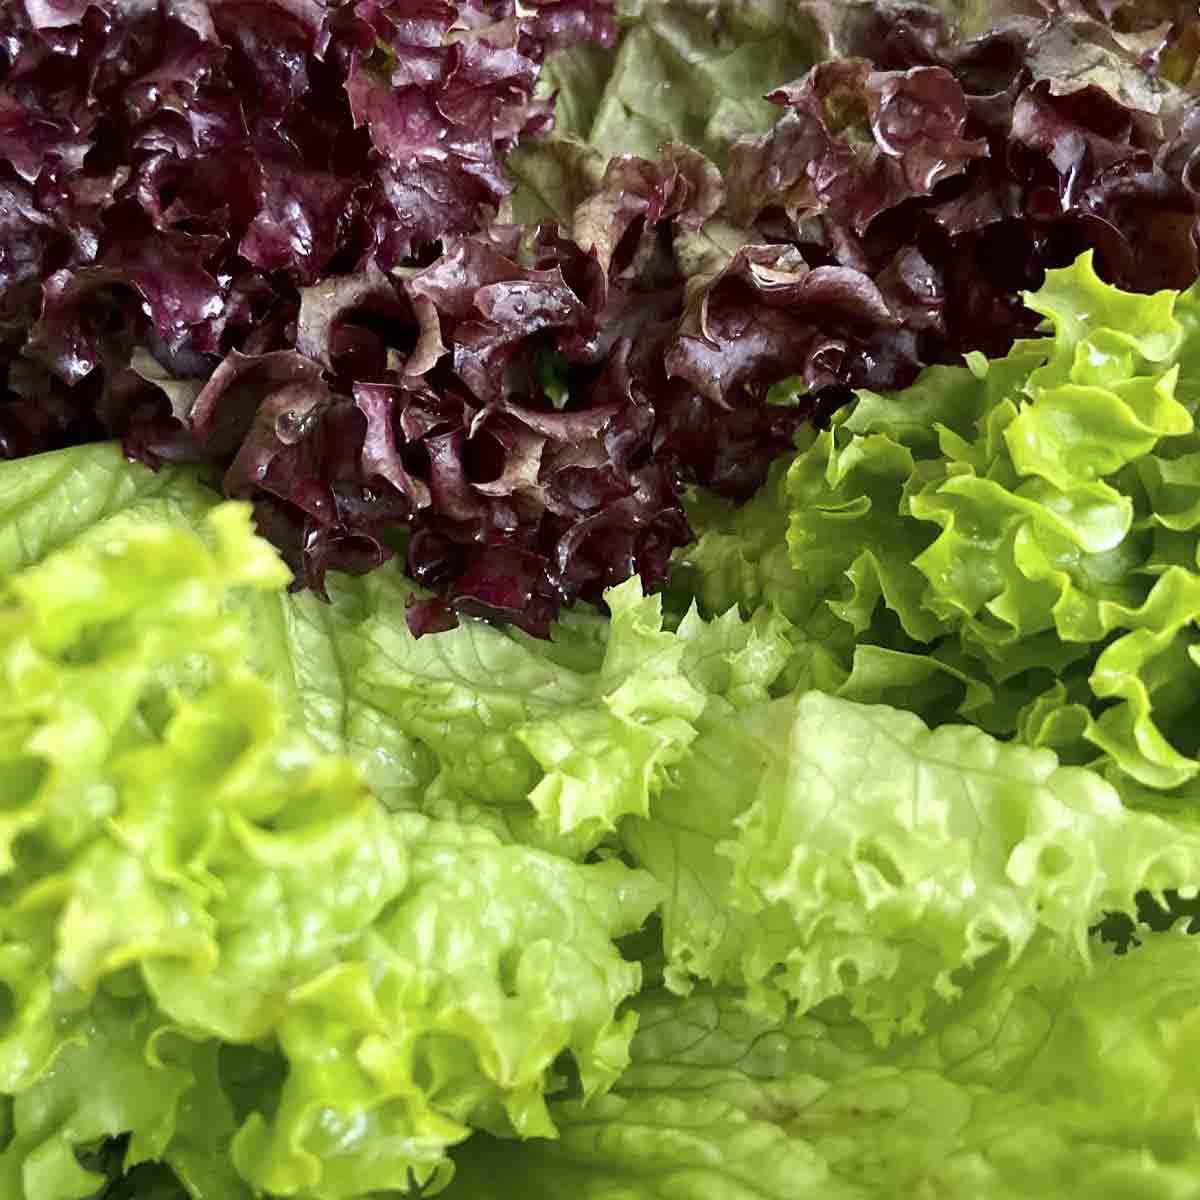 Several colors of lettuce in a bunch.